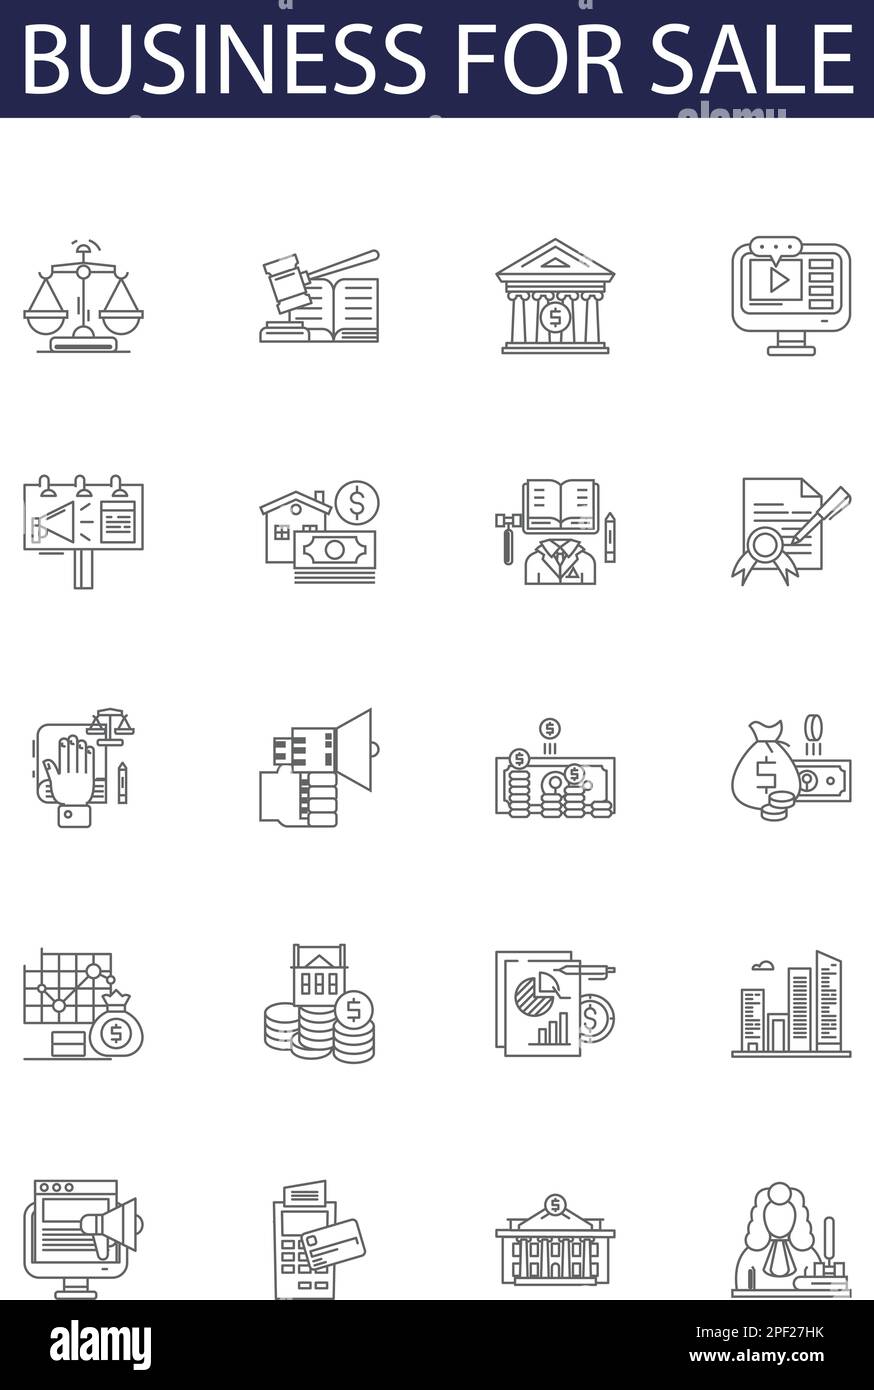 Business for sale line vector icons and signs. Buy, Venture, Franchise, Merger, Investment, Startup, Company, Acquisition outline vector illustration Stock Vector